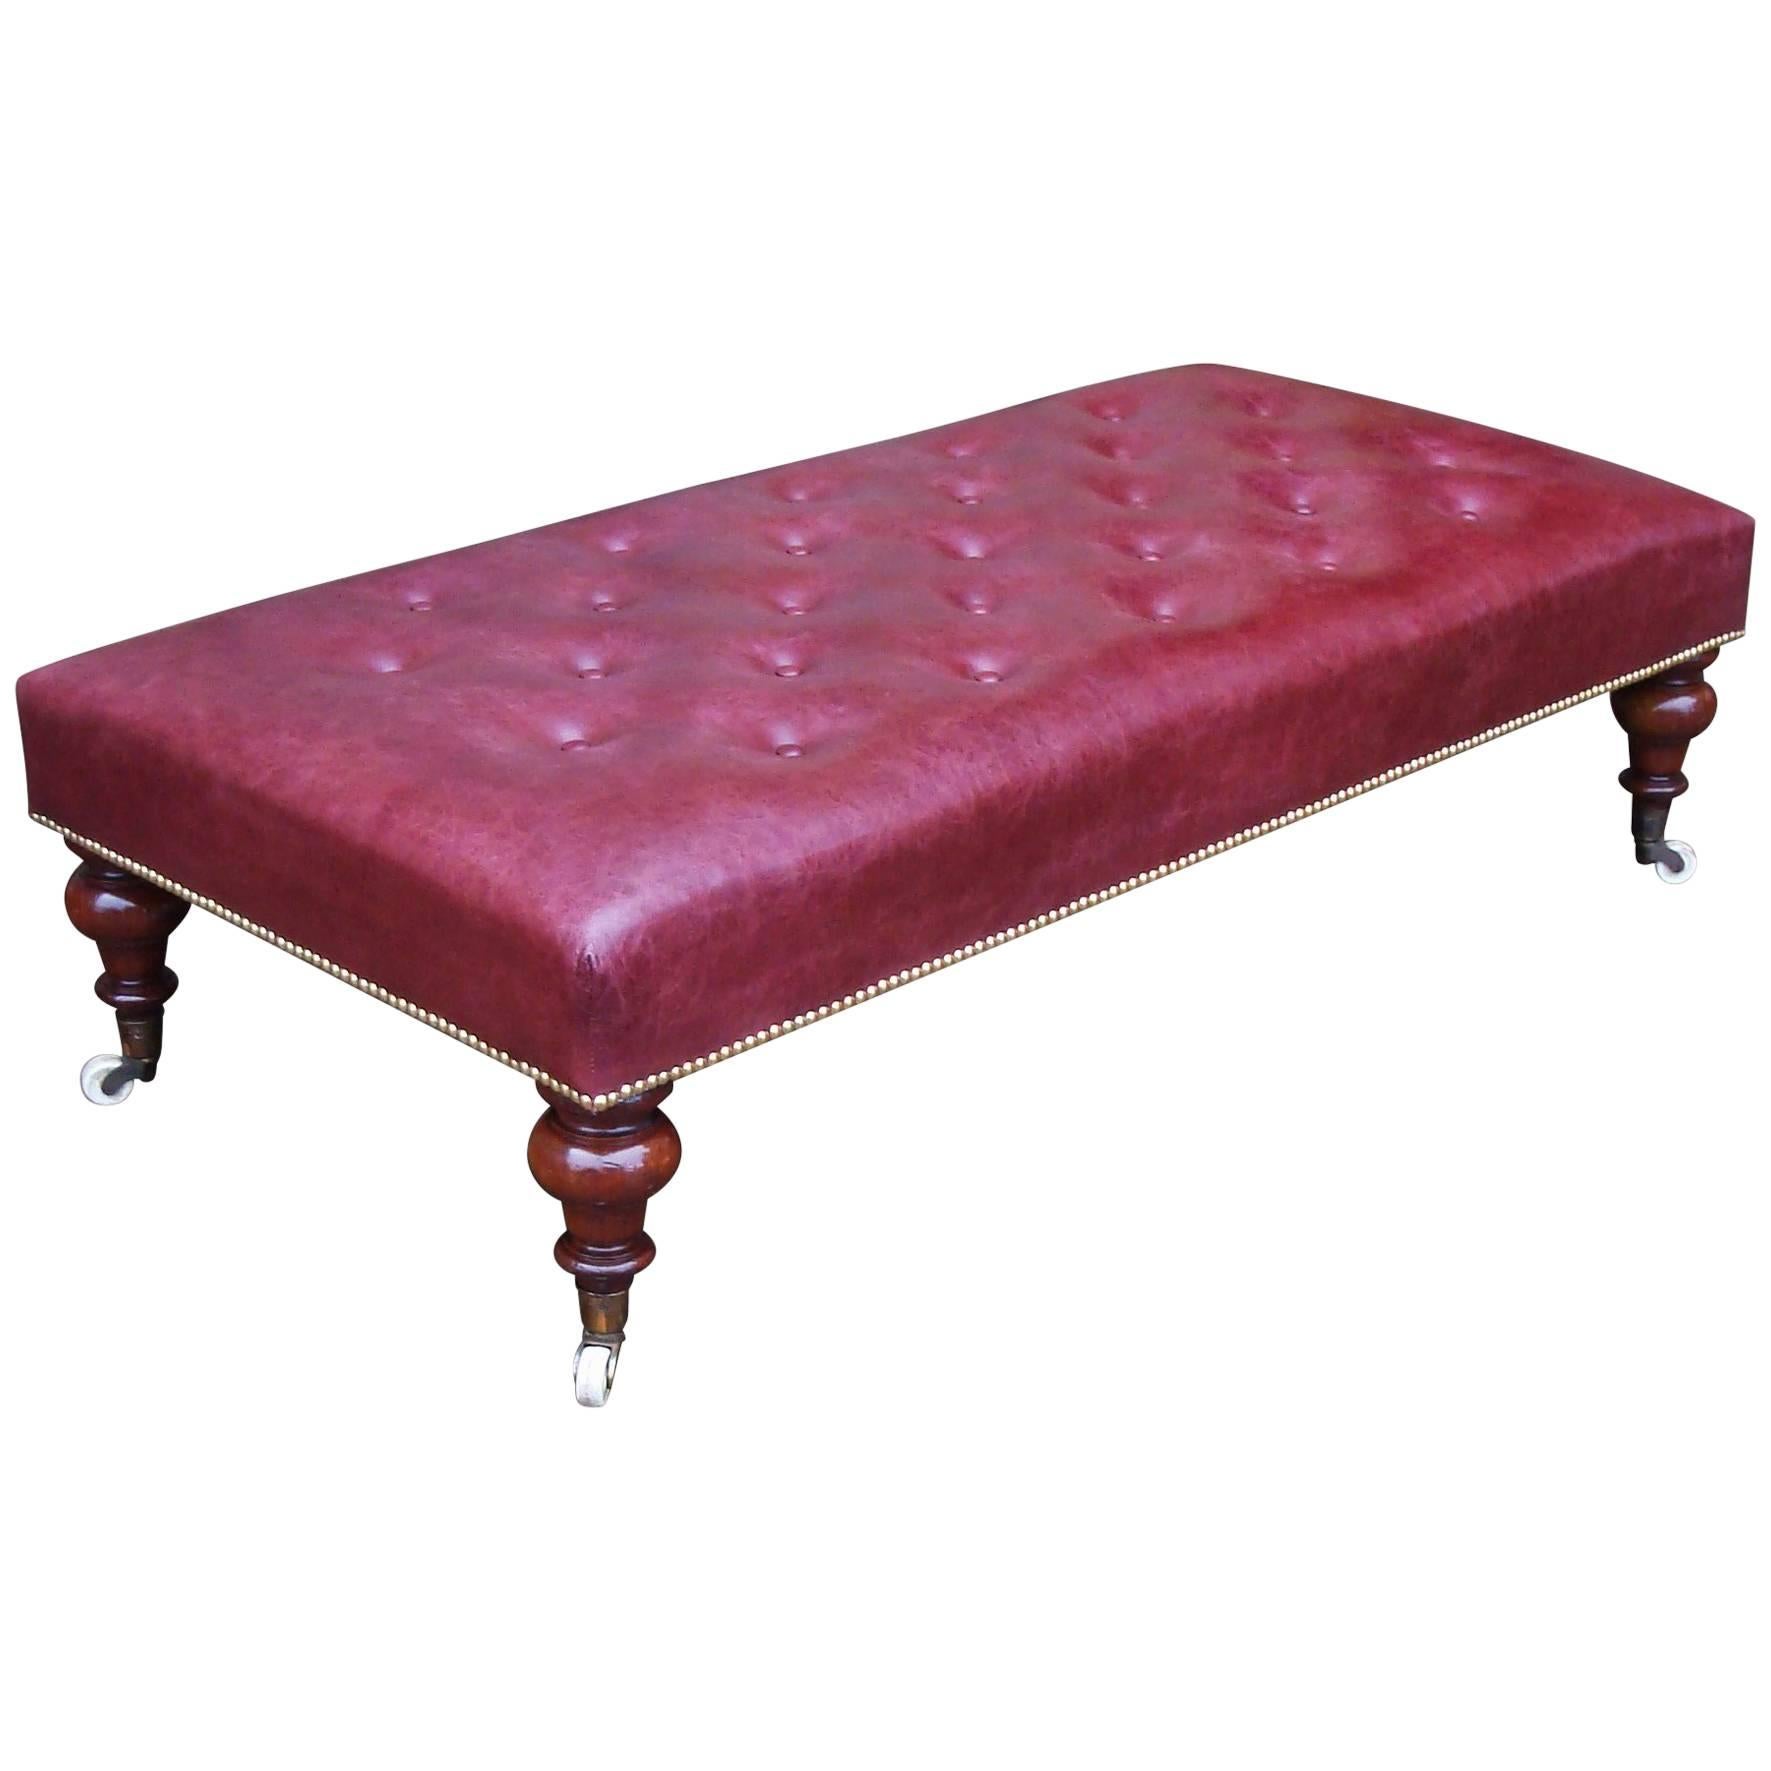 19th Century Large Mahogany and Leather Low Stool